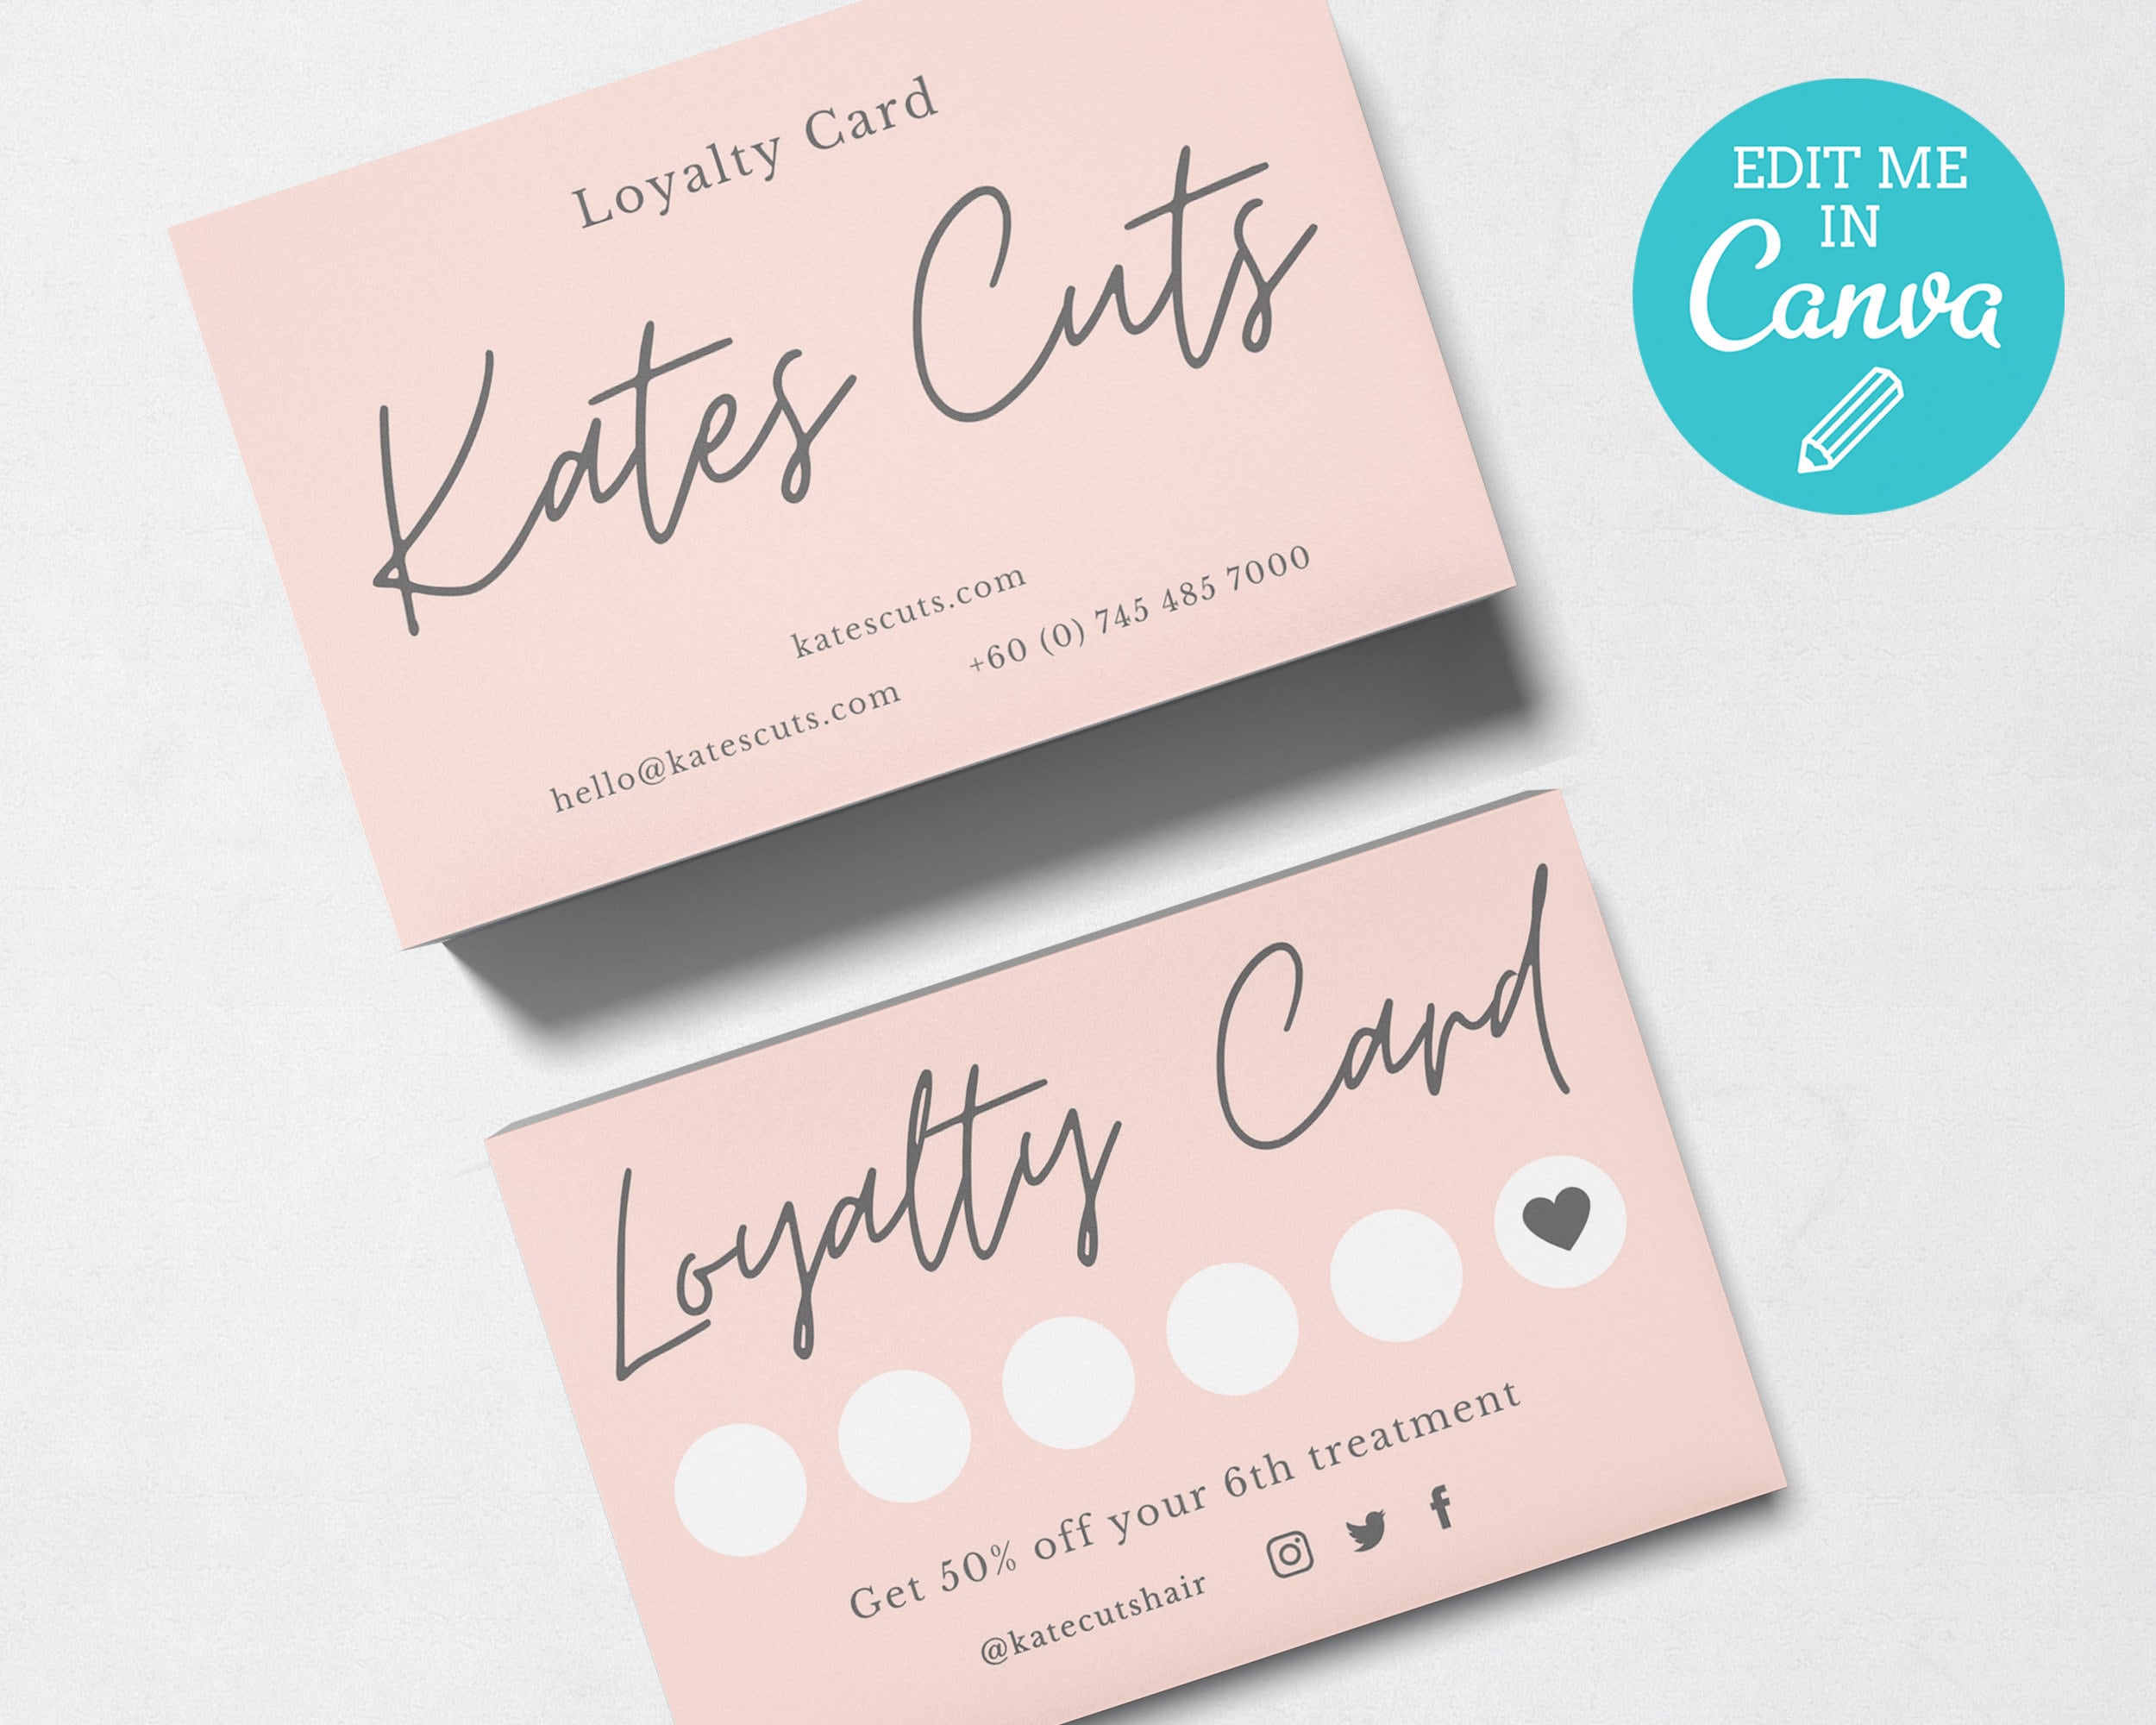 loyalty cards for business 2